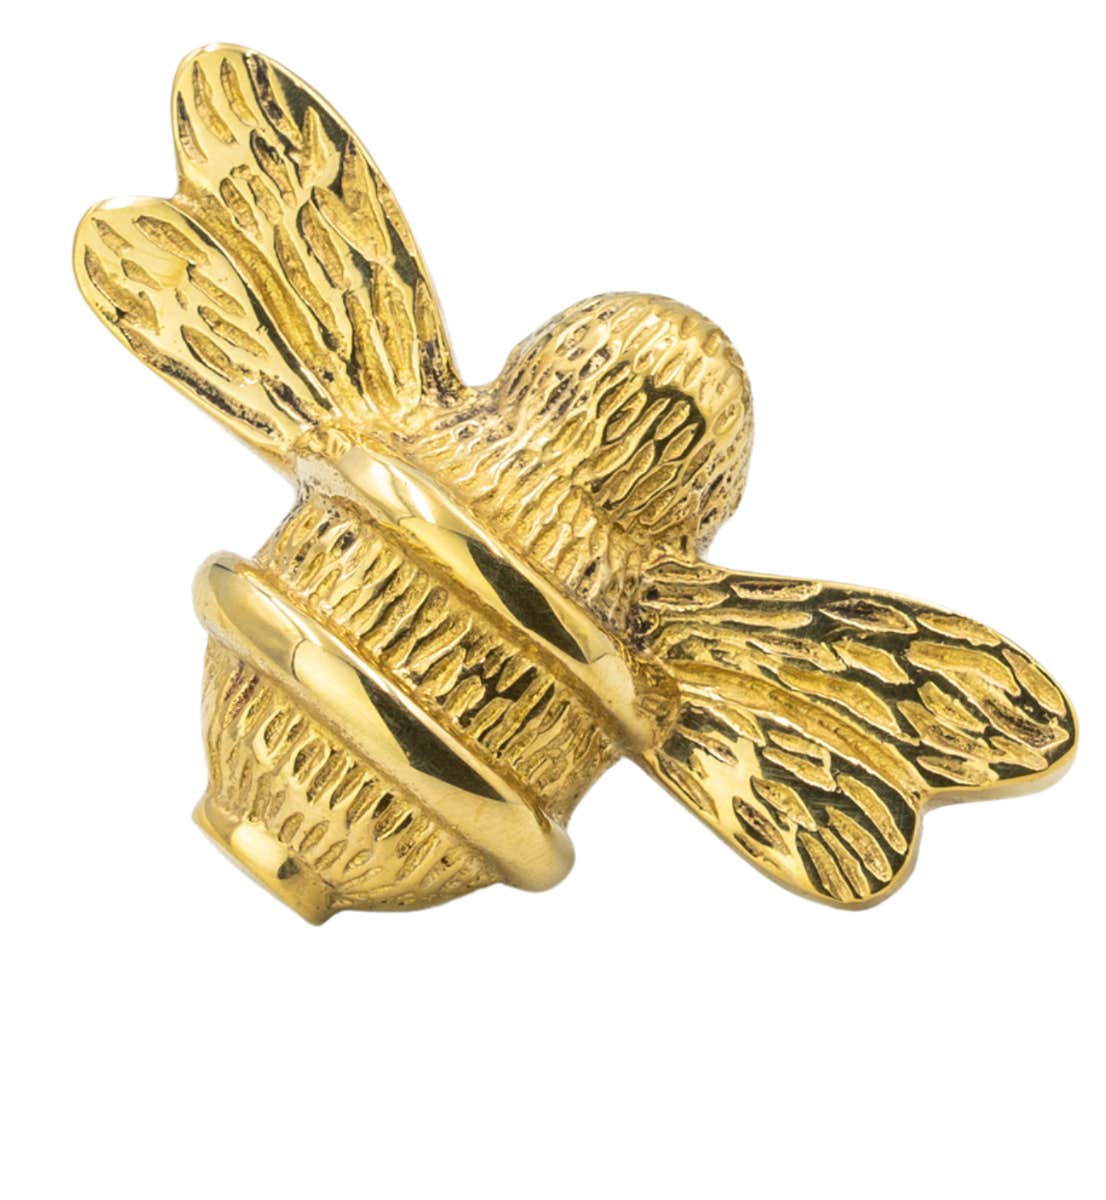 Brass Bumble Bee Cabinet Knob - Gold Polished Brass - 63 x 45mm - Hardware Solutions